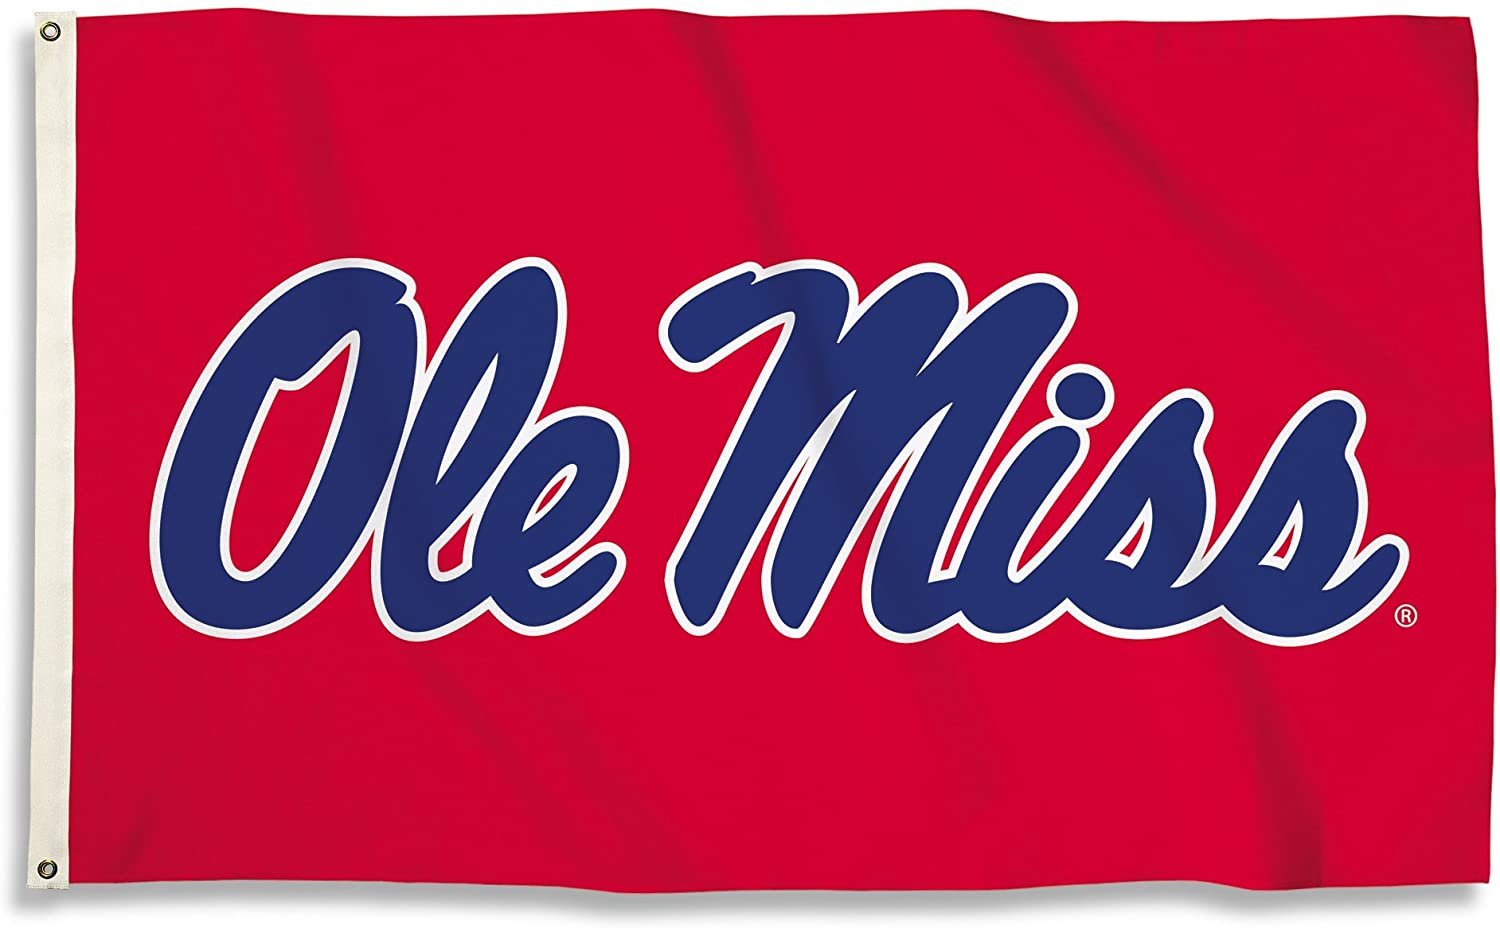 University of Mississippi Ole Miss Rebels Premium 3x5 Feet Flag Banner, Red Design, Metal Grommets, Outdoor Use, Single Sided